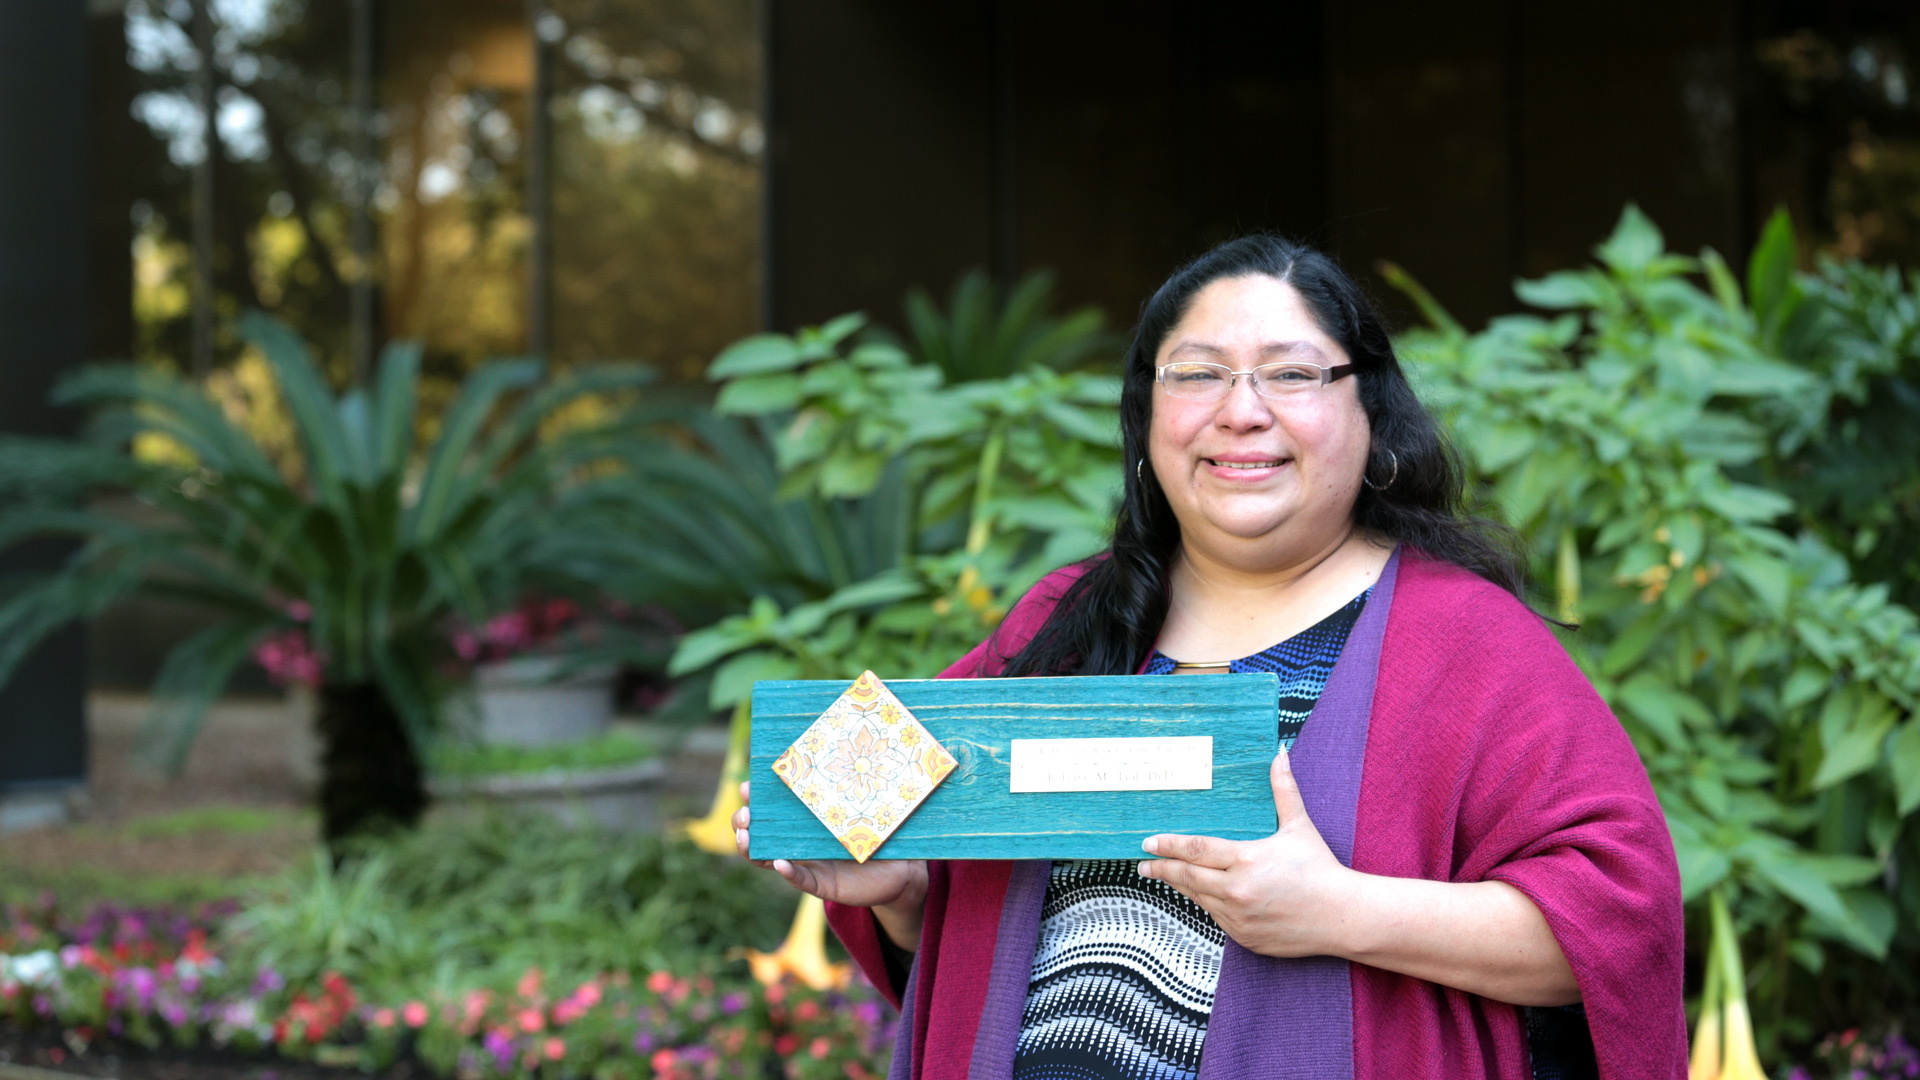 Latino organization recognizes UHCL's Leal as social worker of the year